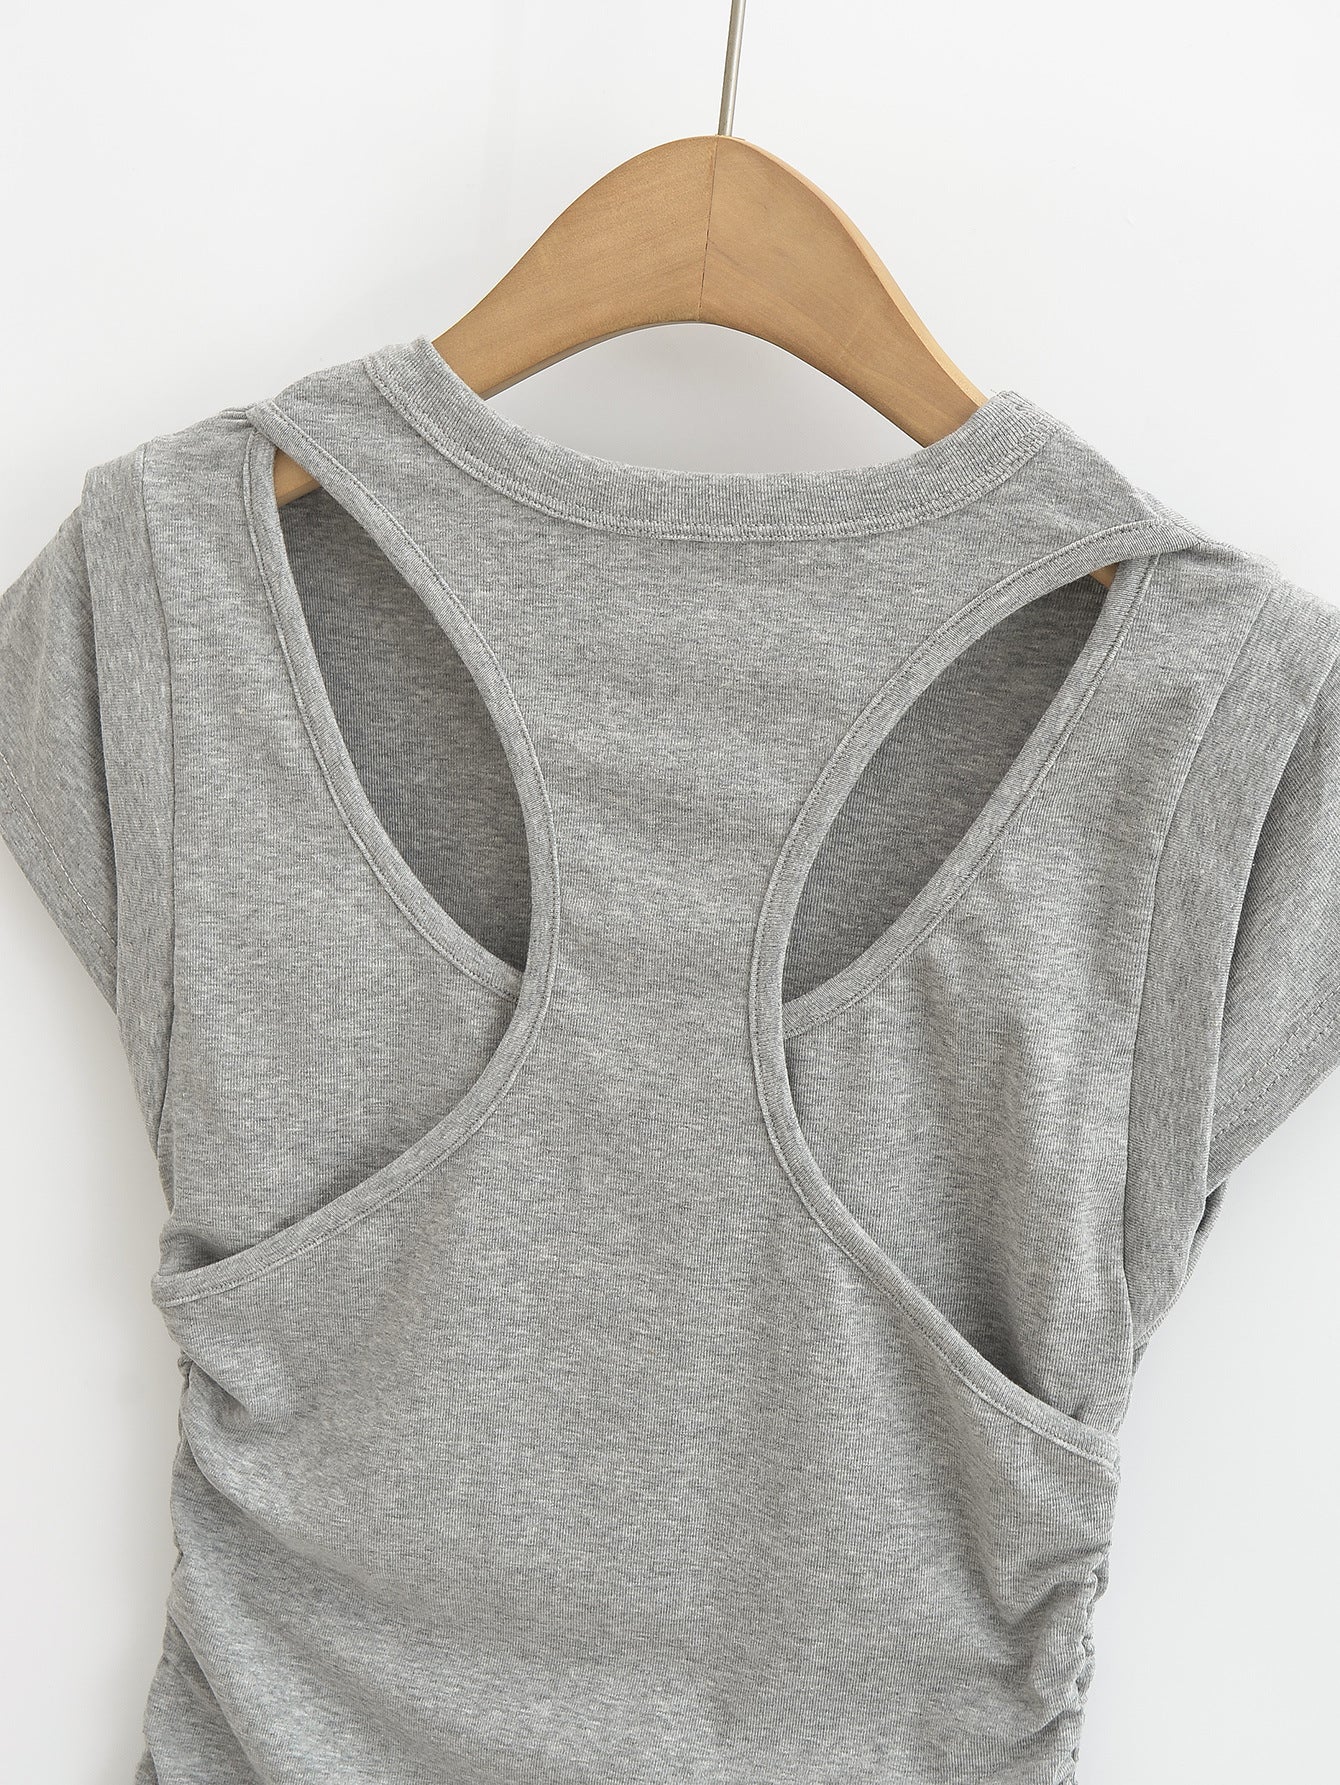 Work or Play Mock Neck Top